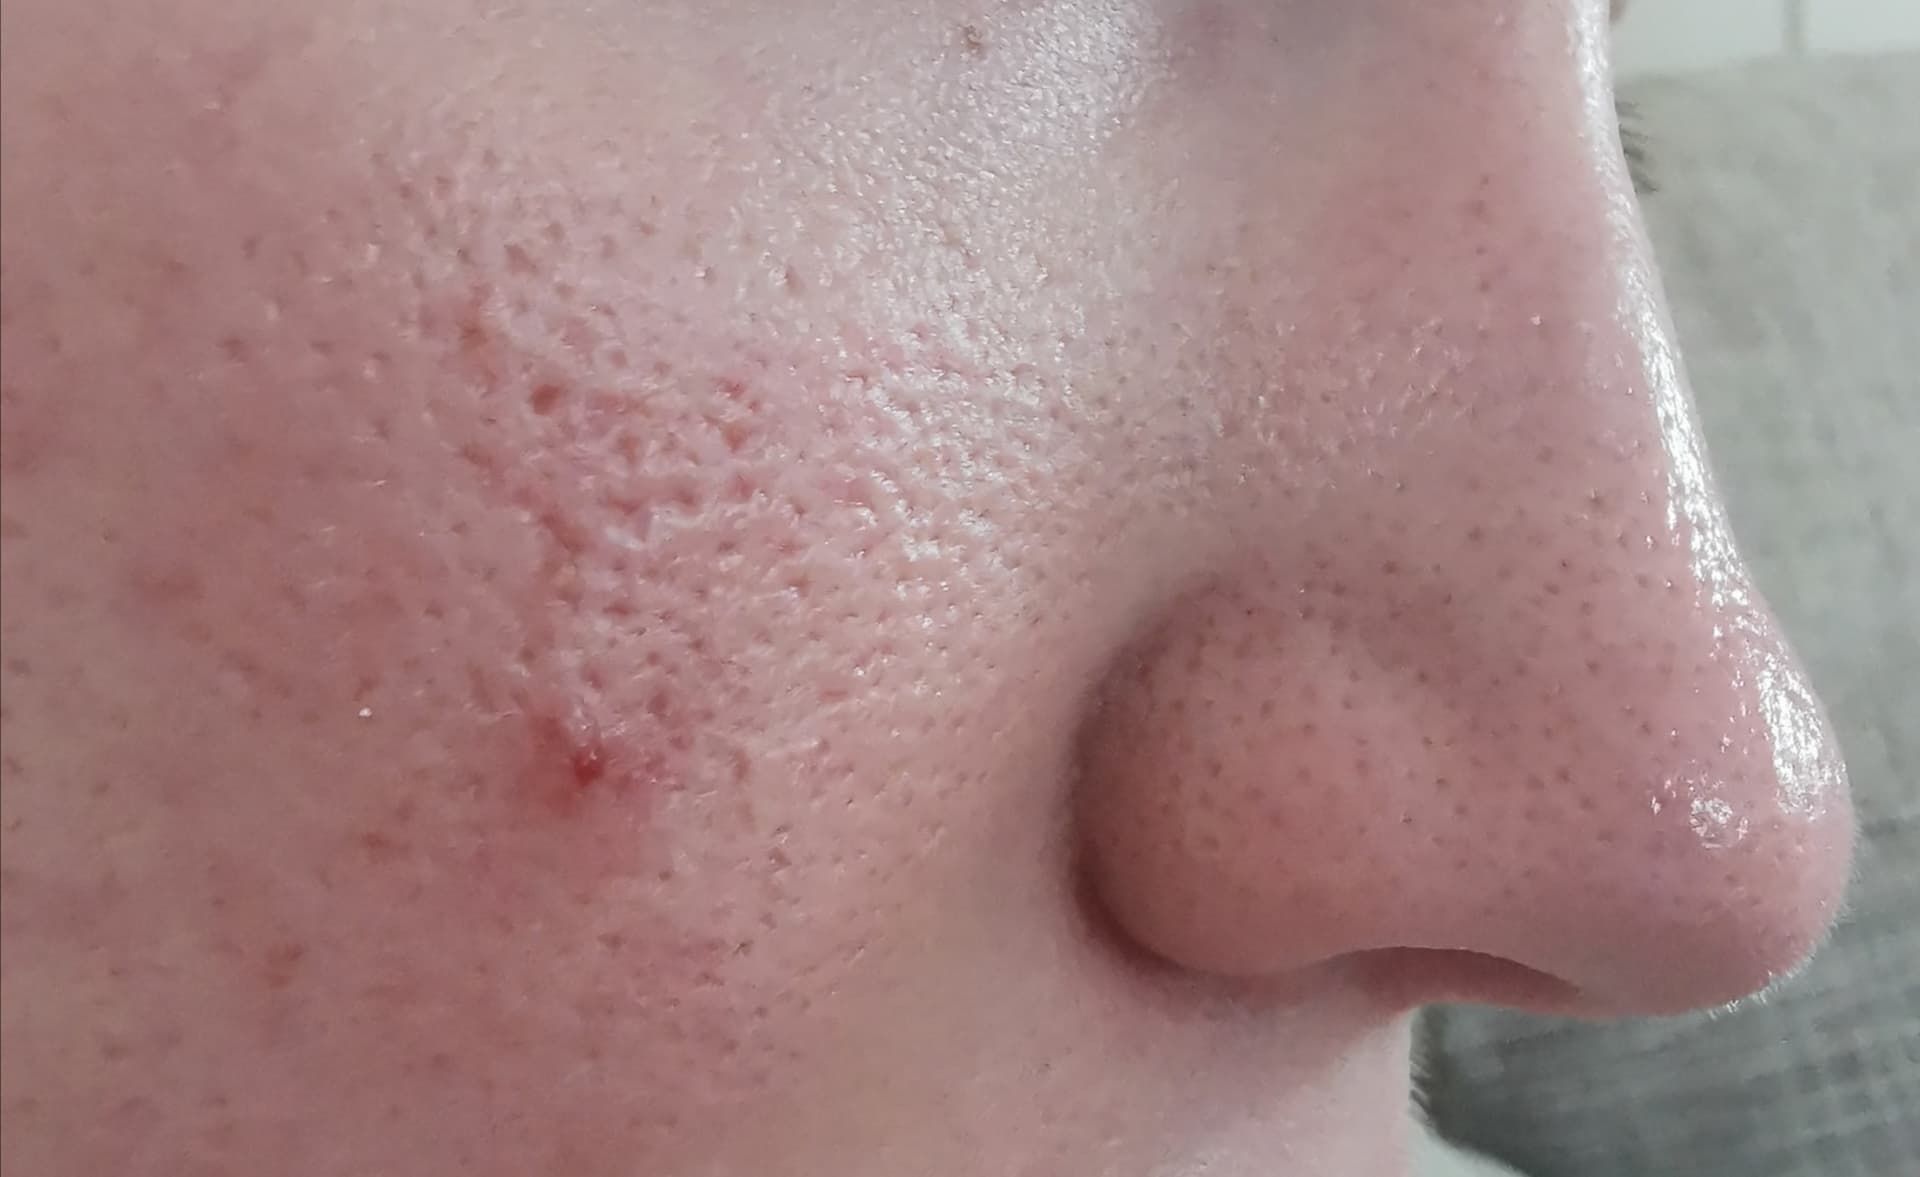 Severely enlarged pores - General acne discussion - Acne.org